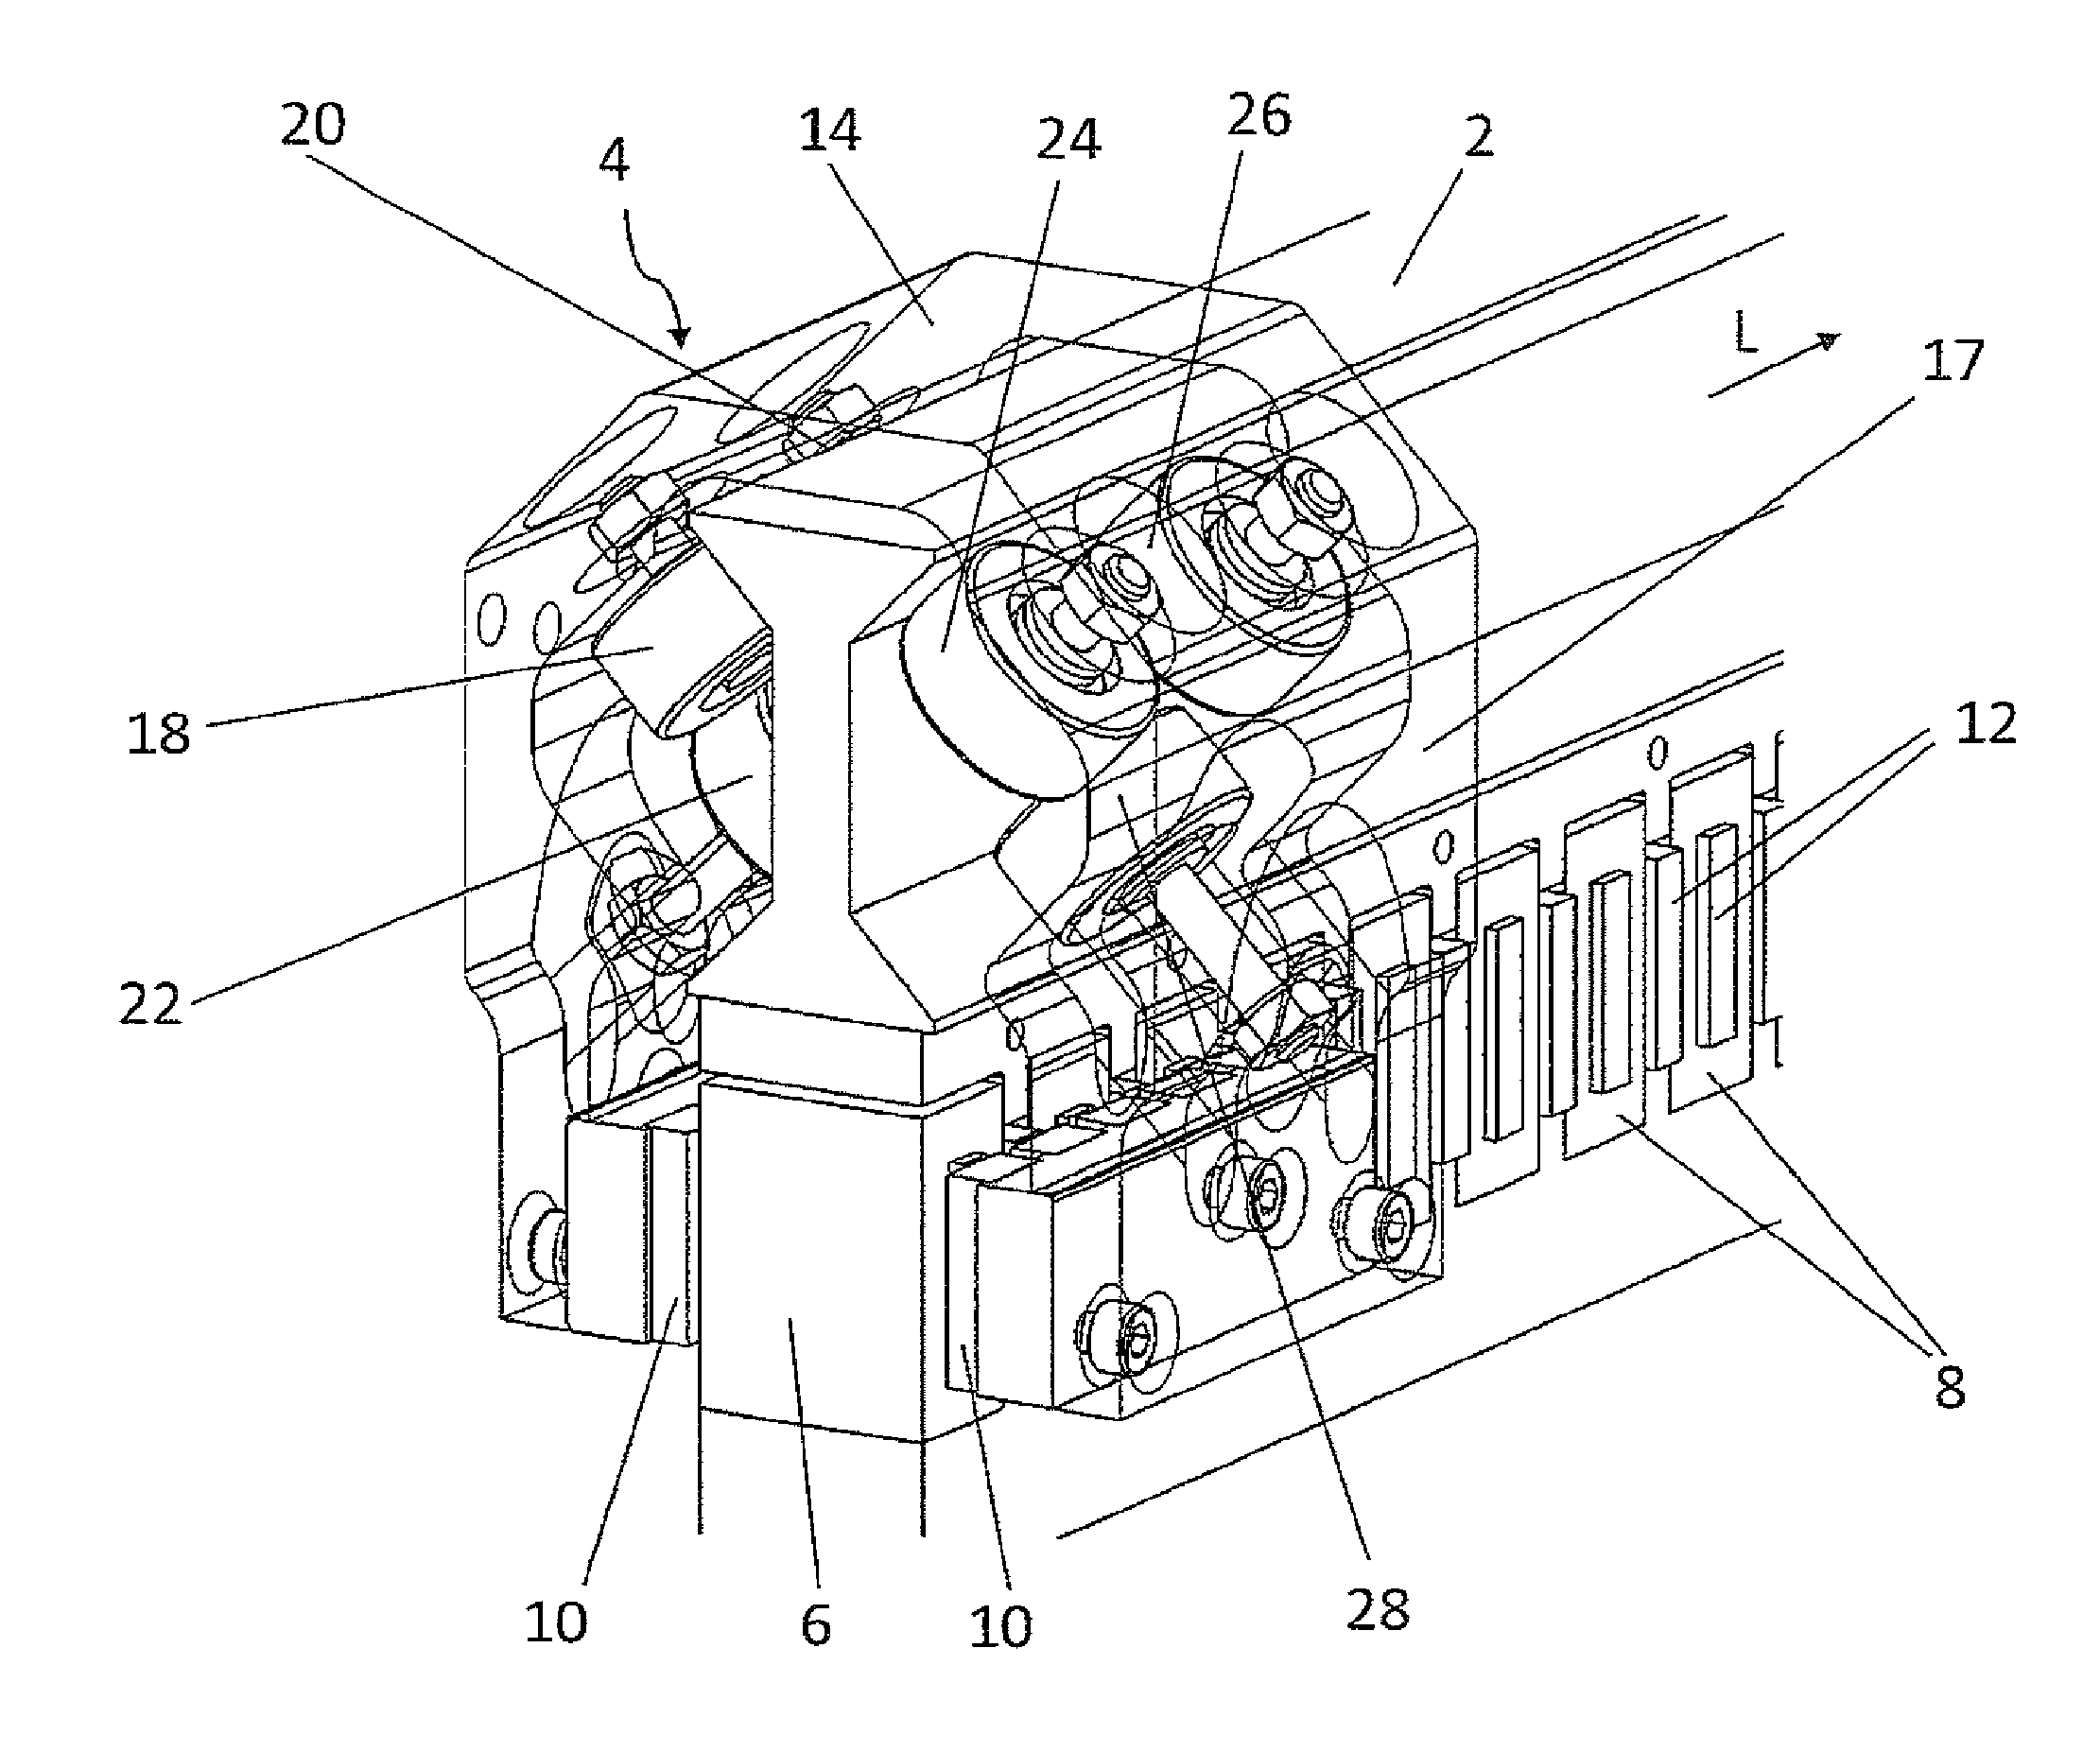 Transport device with linear-motor drive